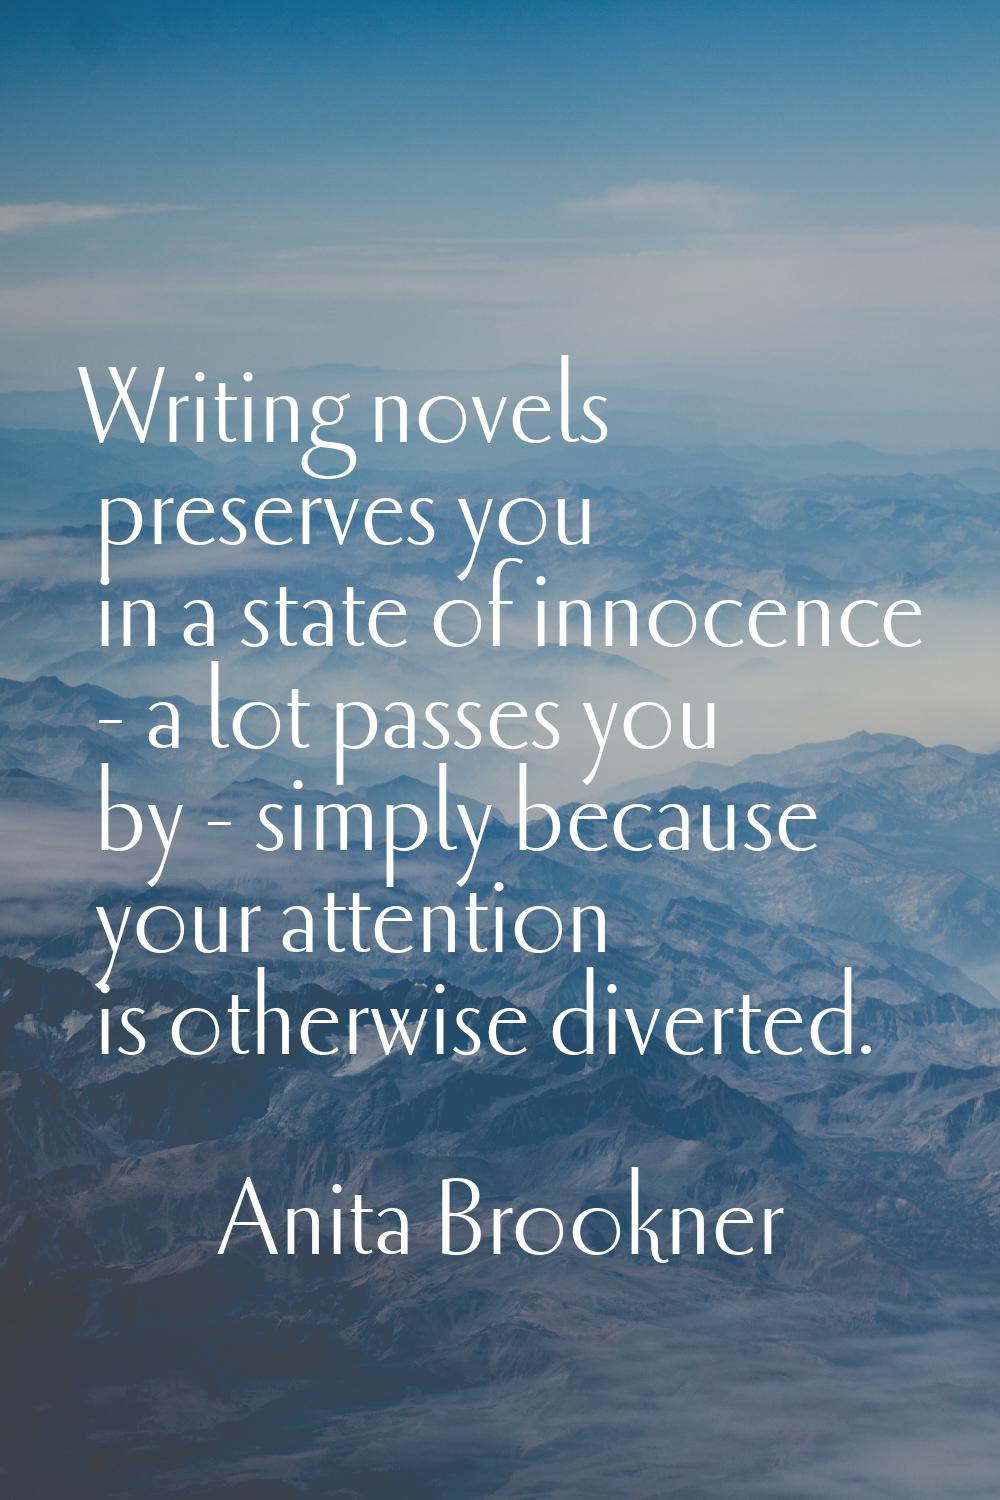 Writing novels preserves you in a state of innocence - a lot passes you by - simply because your at